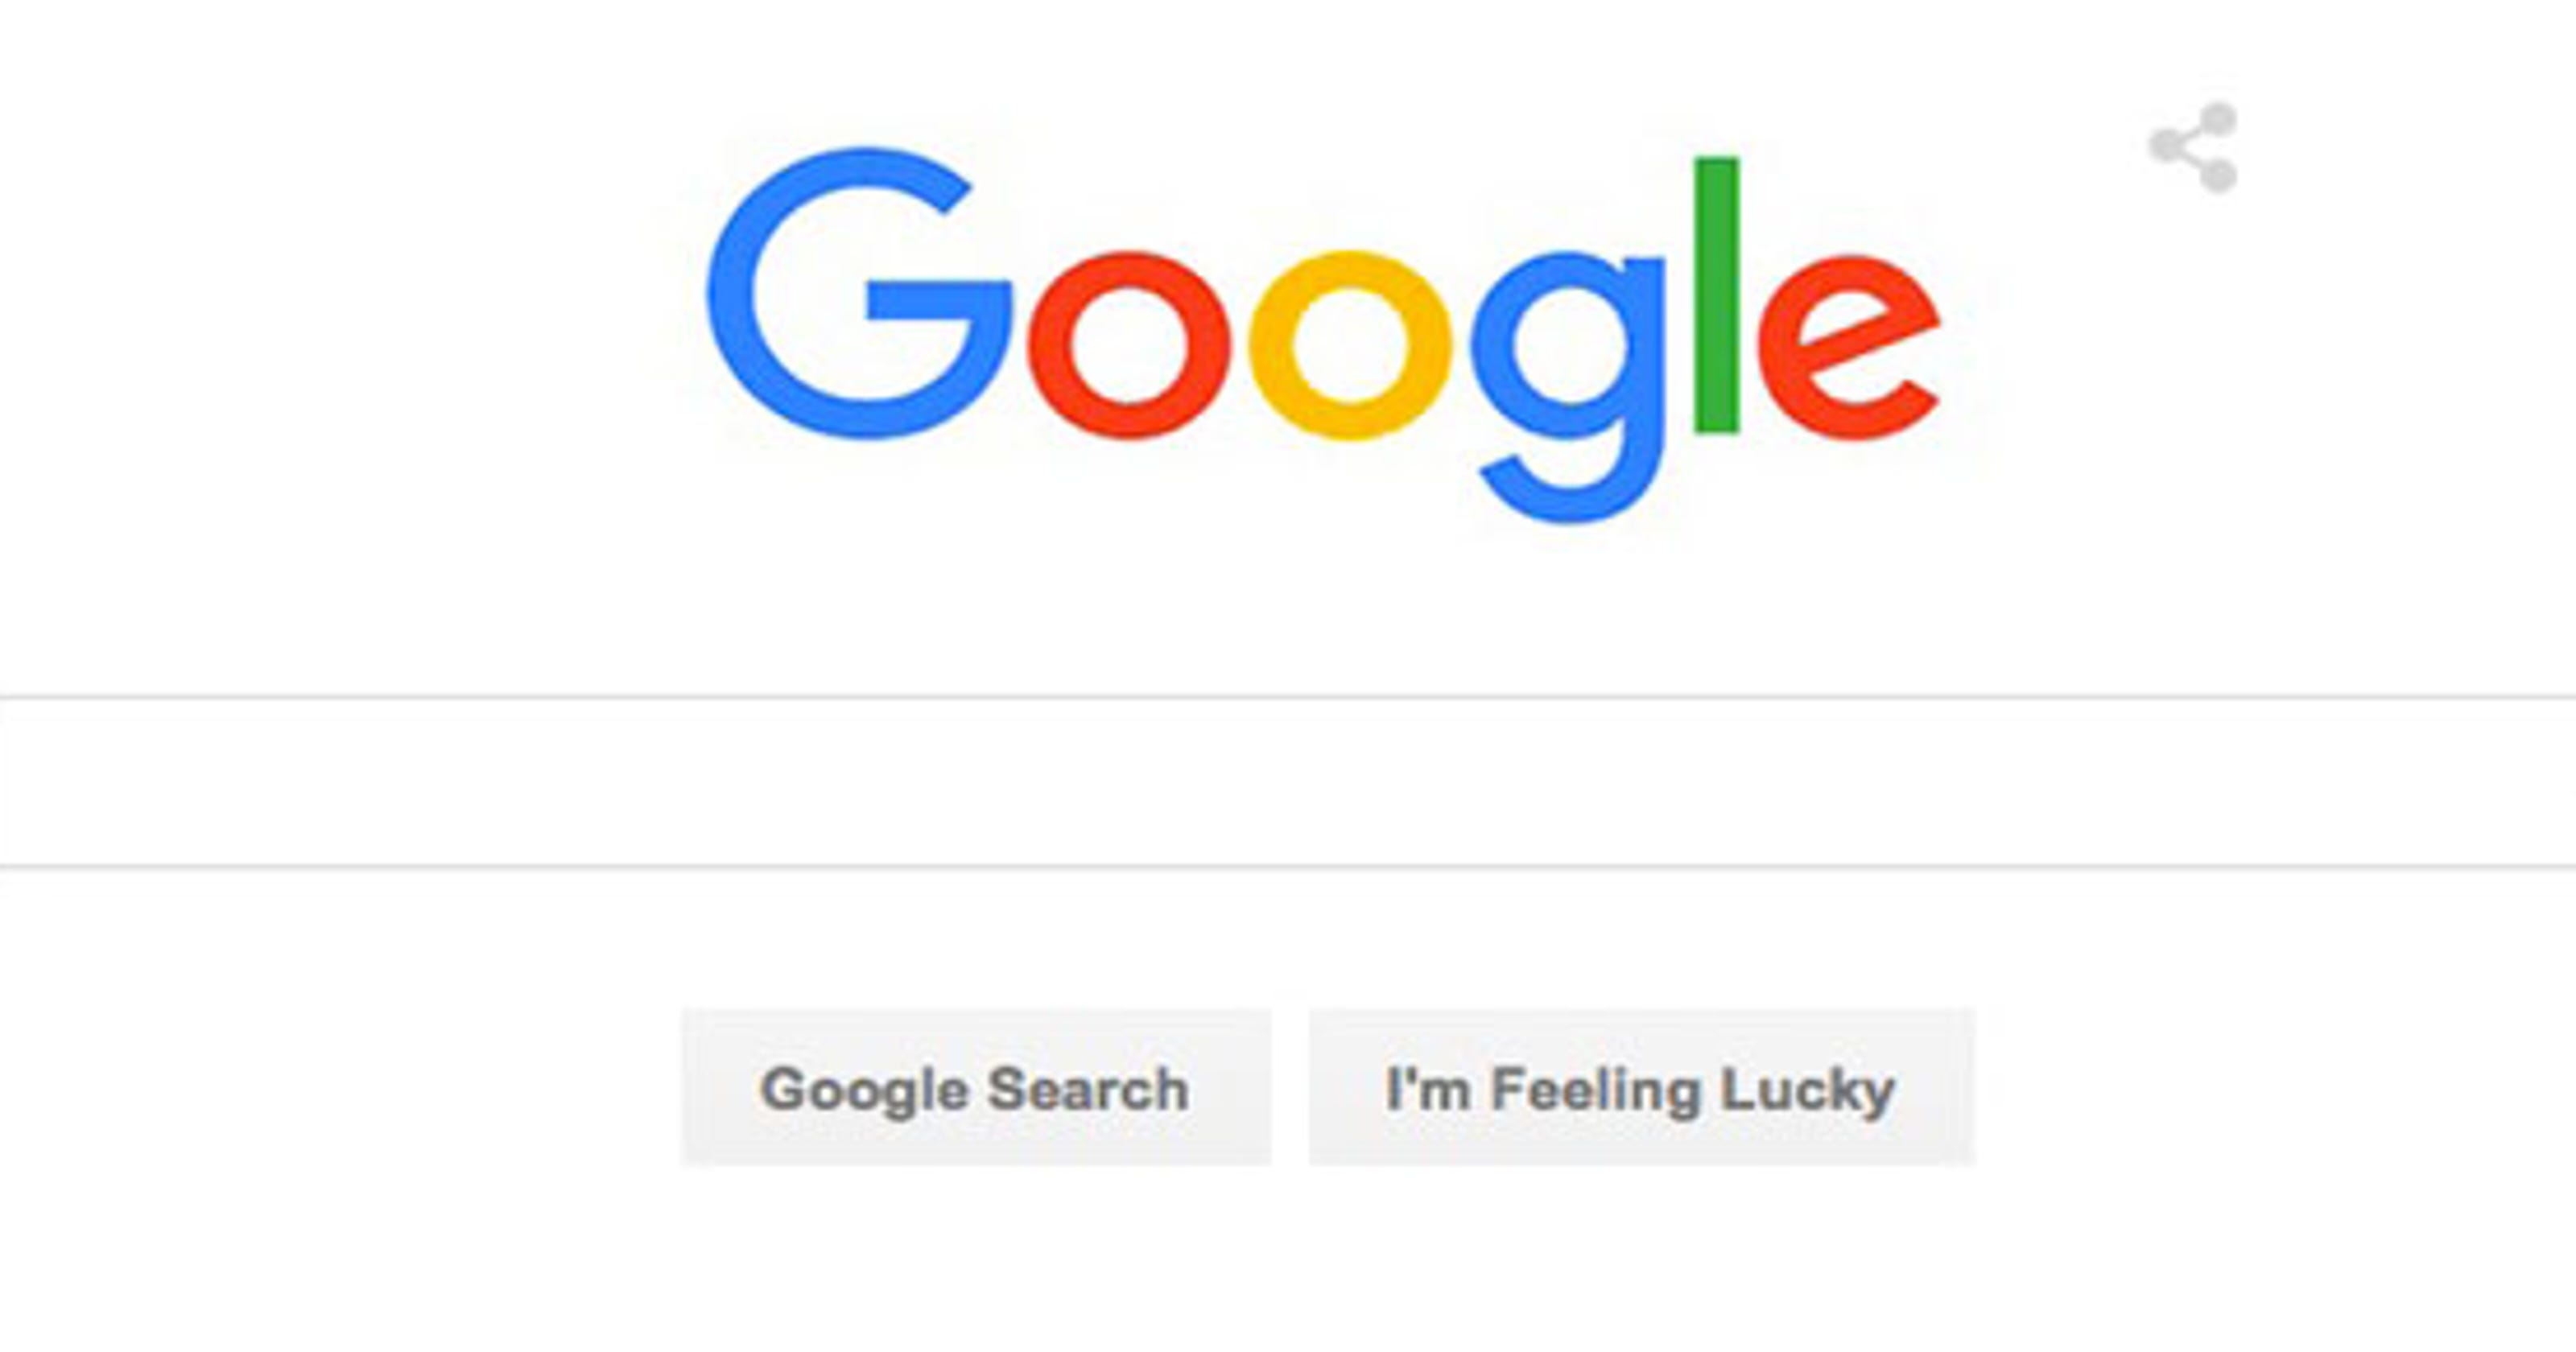 Google unveils new logo with emphasis on apps, devices3200 x 1680